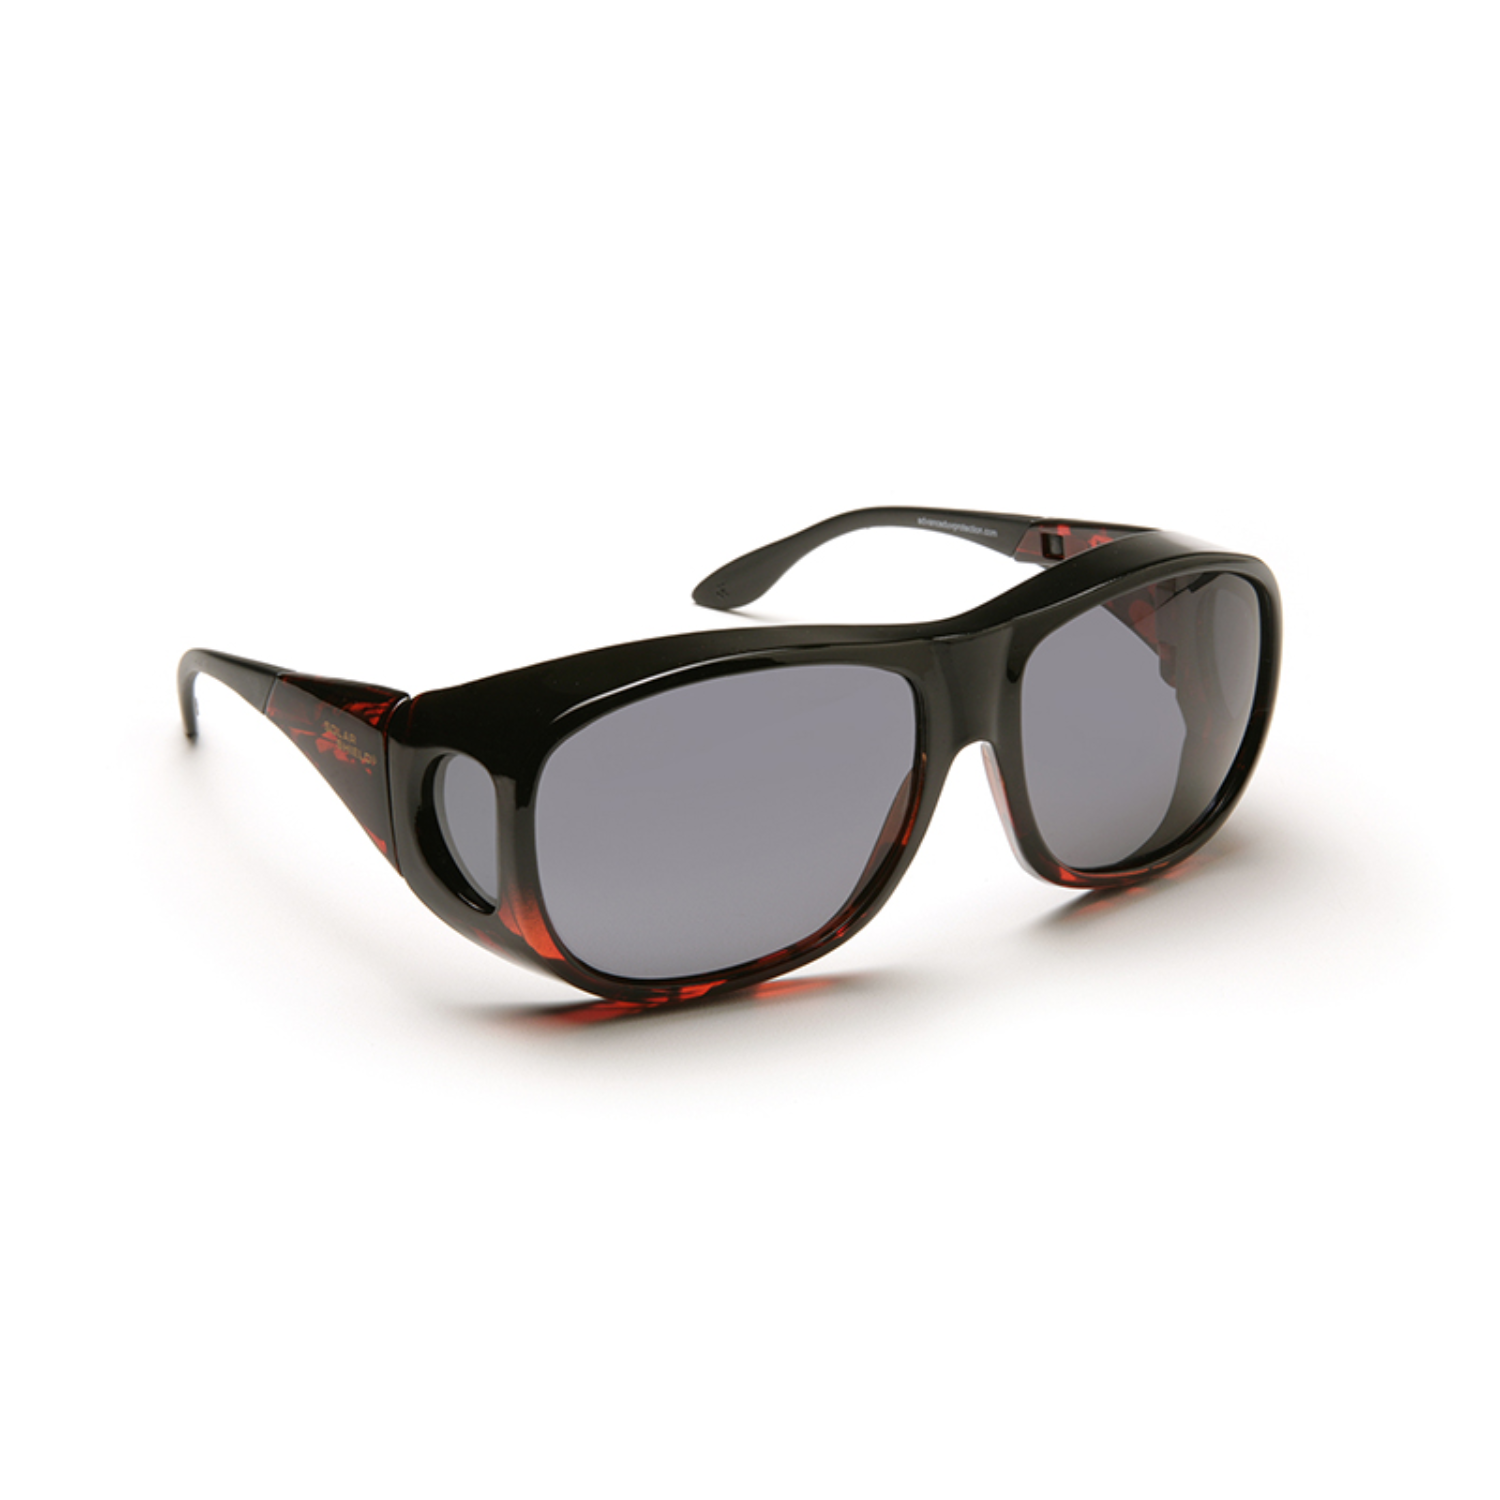 Image of the Eschenbach Solar Shield Polarized Fit-Over Sunglasses with gray tint.